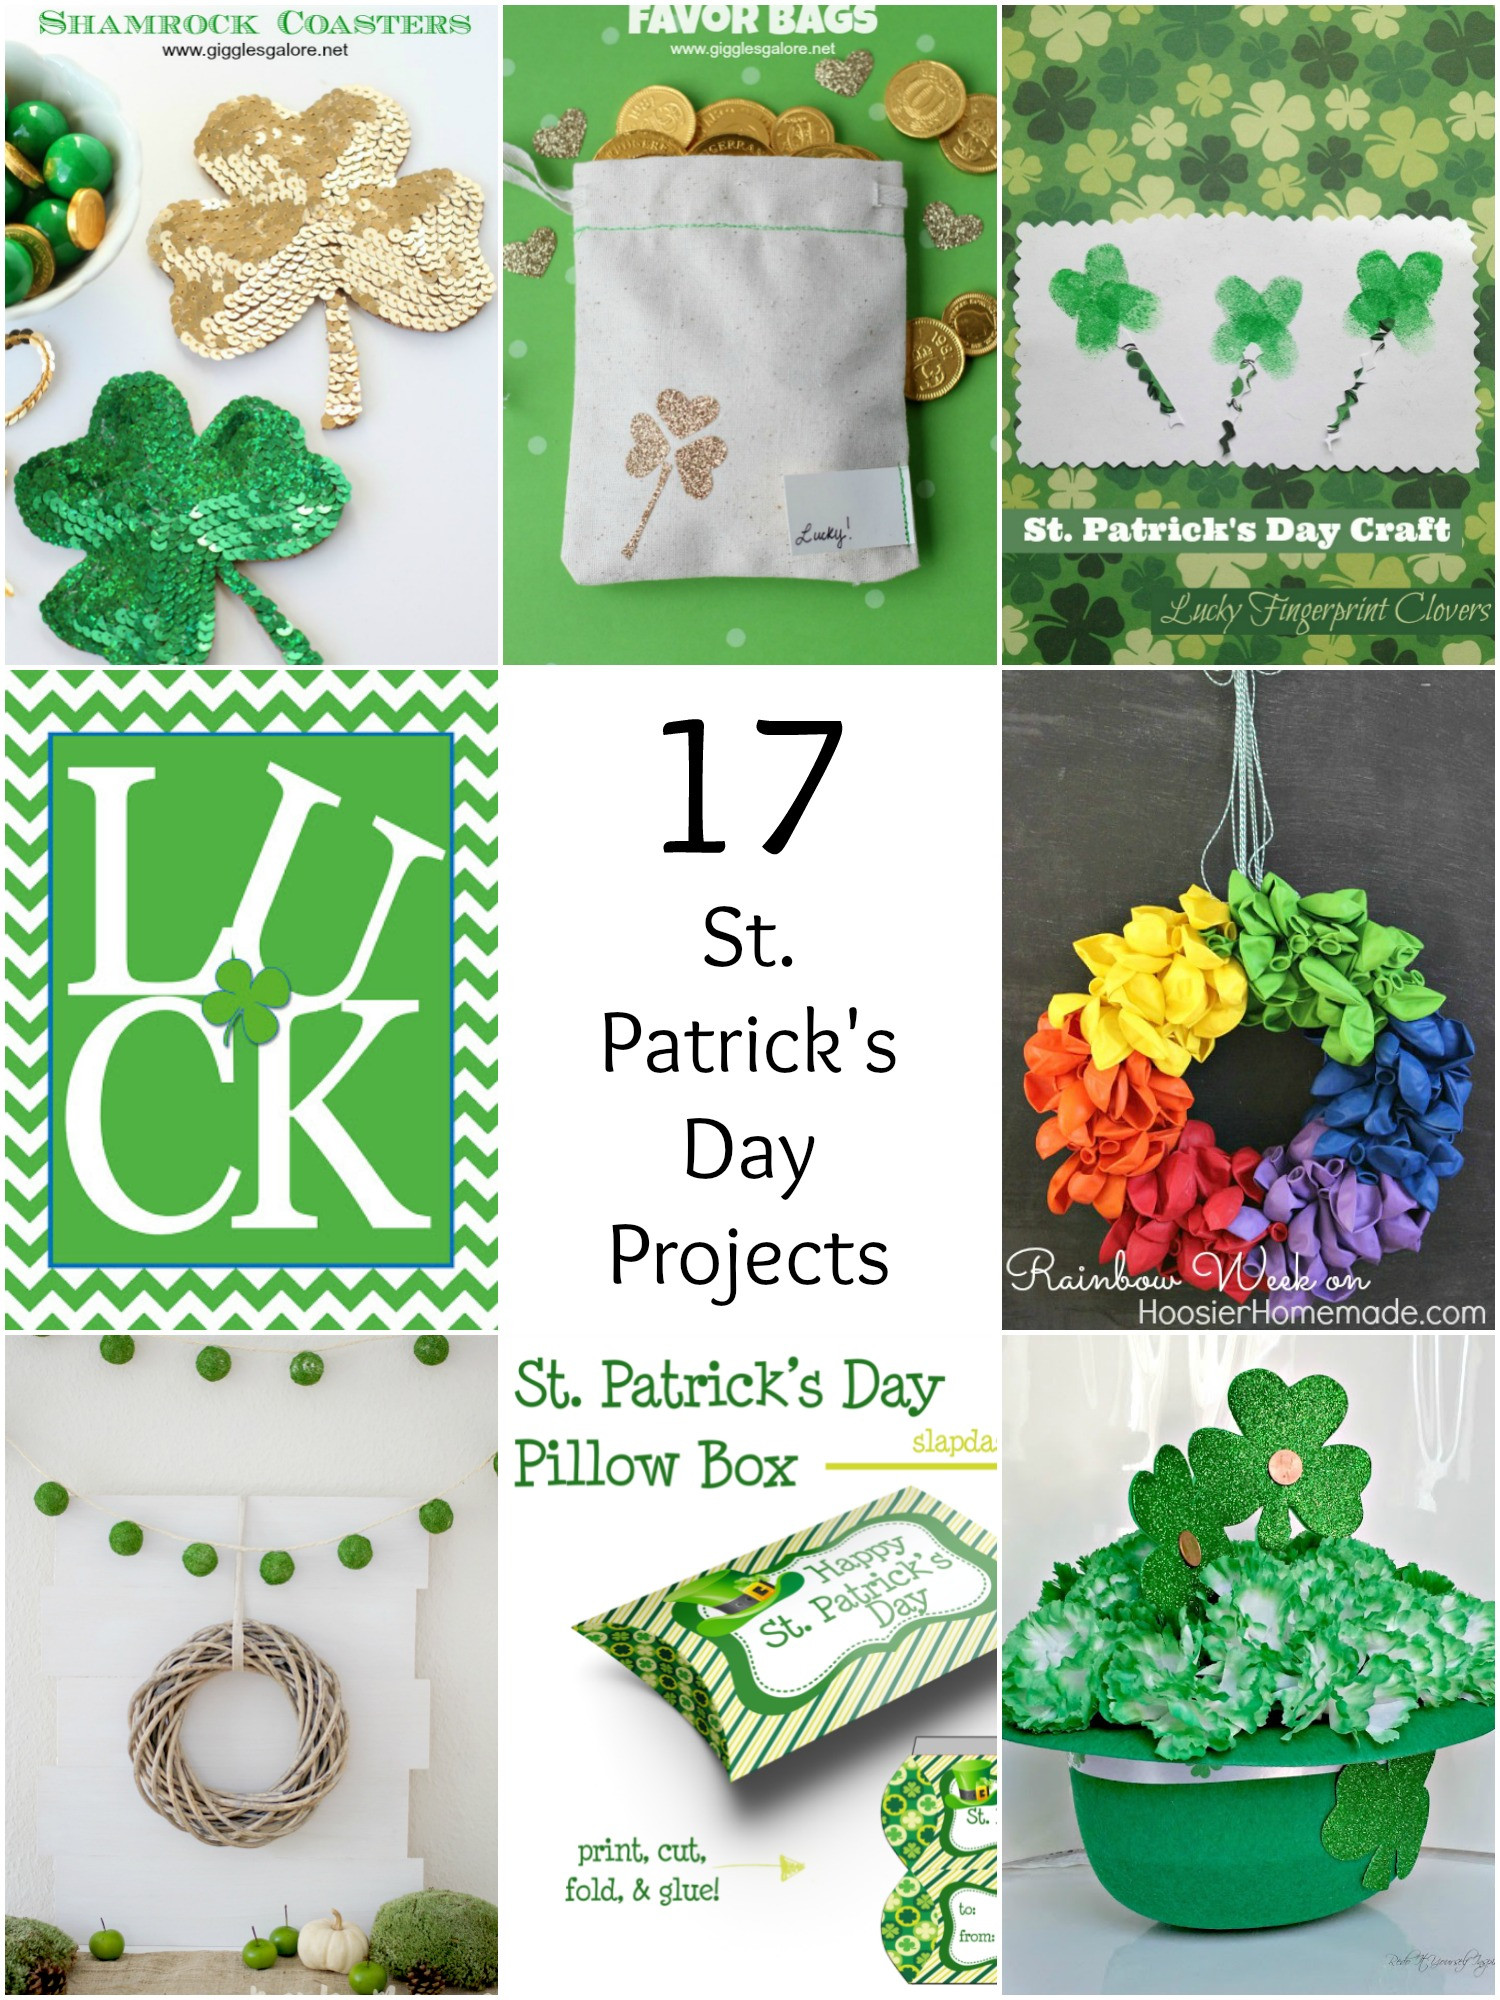 St Patrick's Day Craft Ideas
 So Creative 17 Fun St Patrick s Day Projects